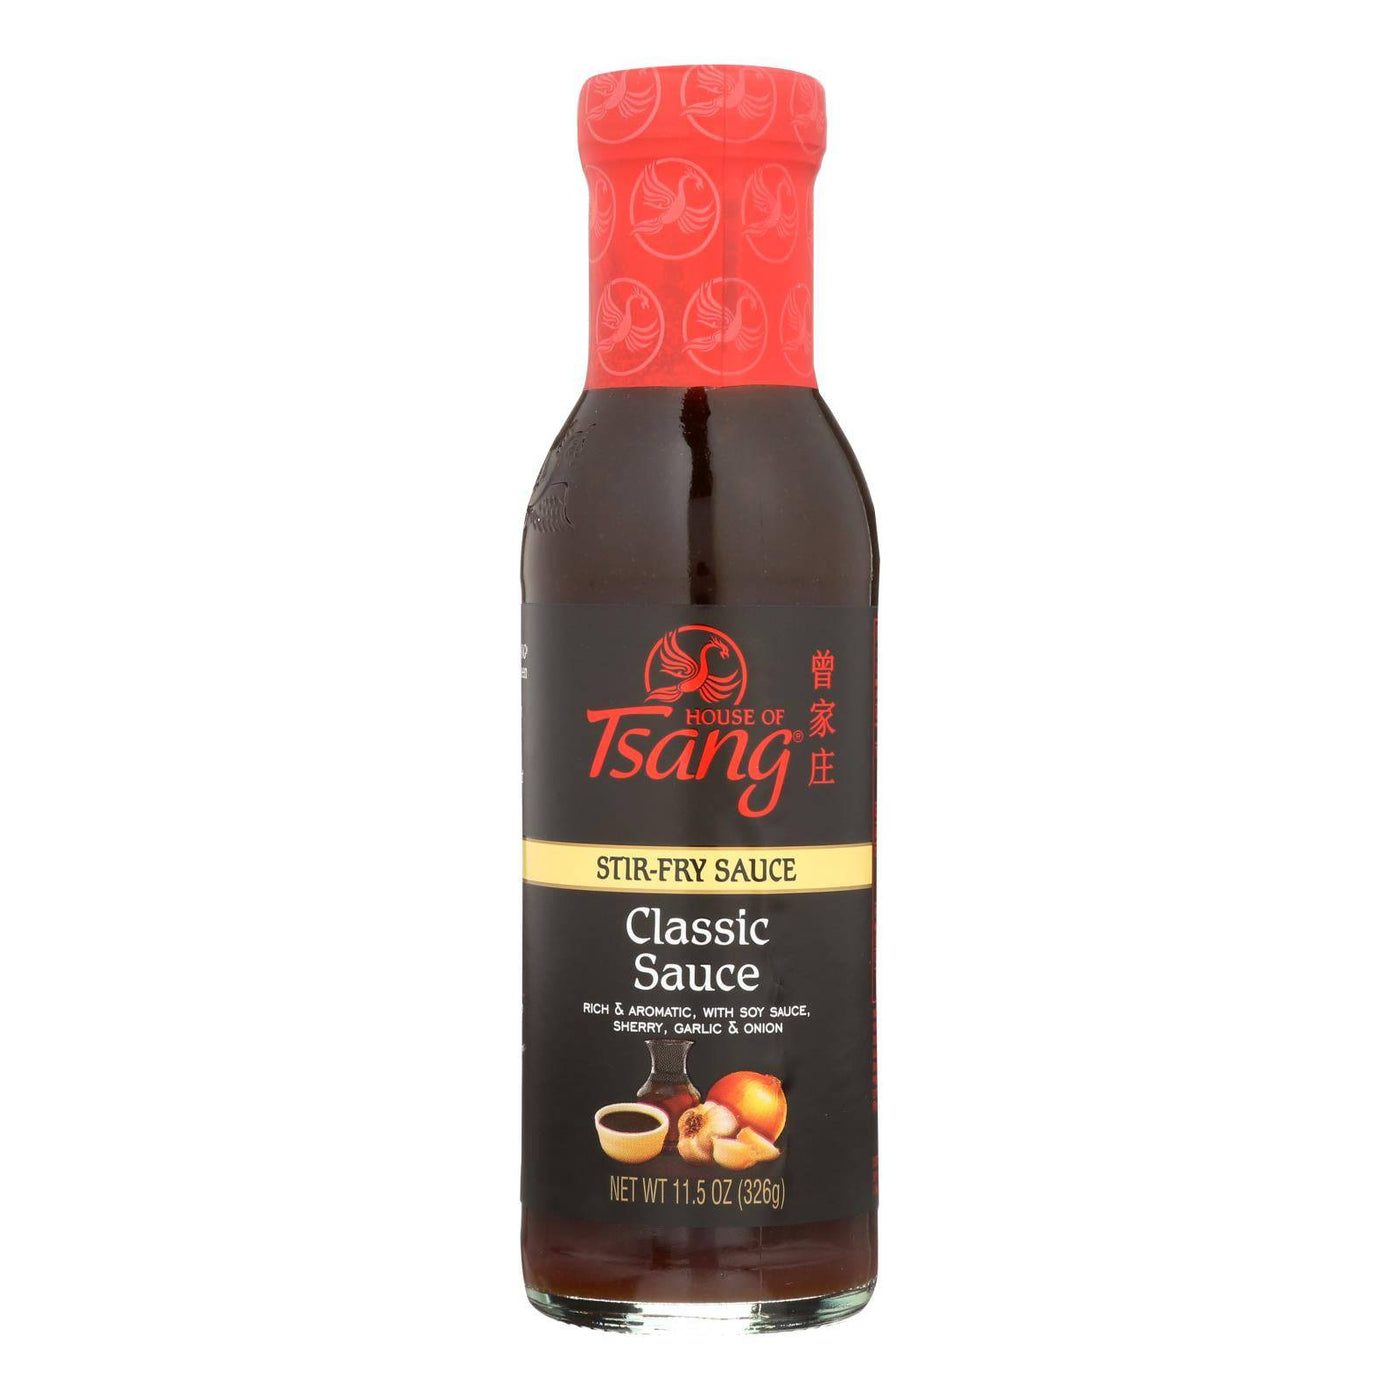 Buy House Of Tsang Classic Stir-fry Sauce  - Case Of 6 - 11.5 Oz  at OnlyNaturals.us